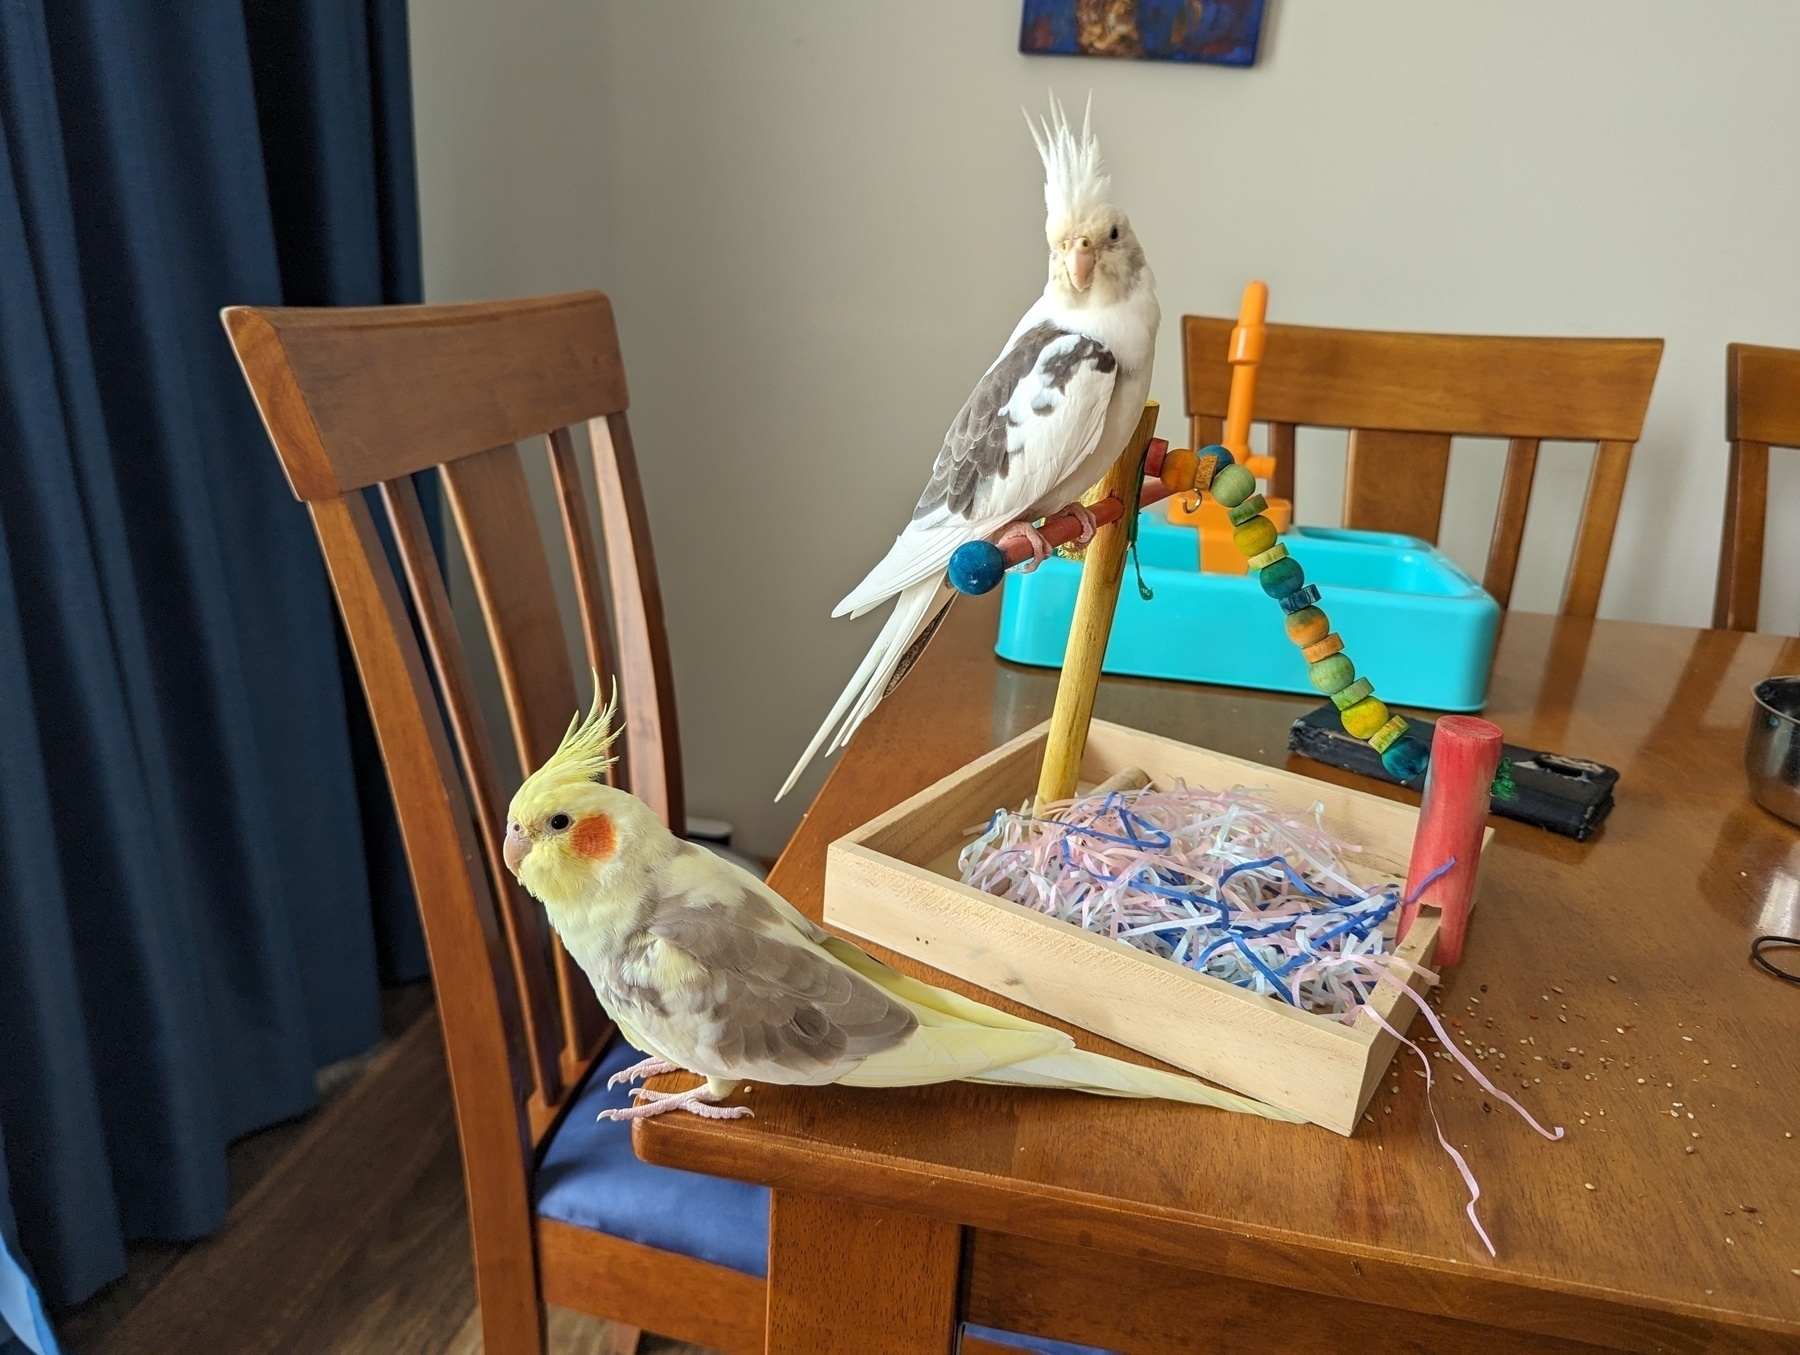 Two cockatiels on a table, a yellow one perched by the edge, and a white one perched on some bird play equipment. There are two chairs by the table in shot